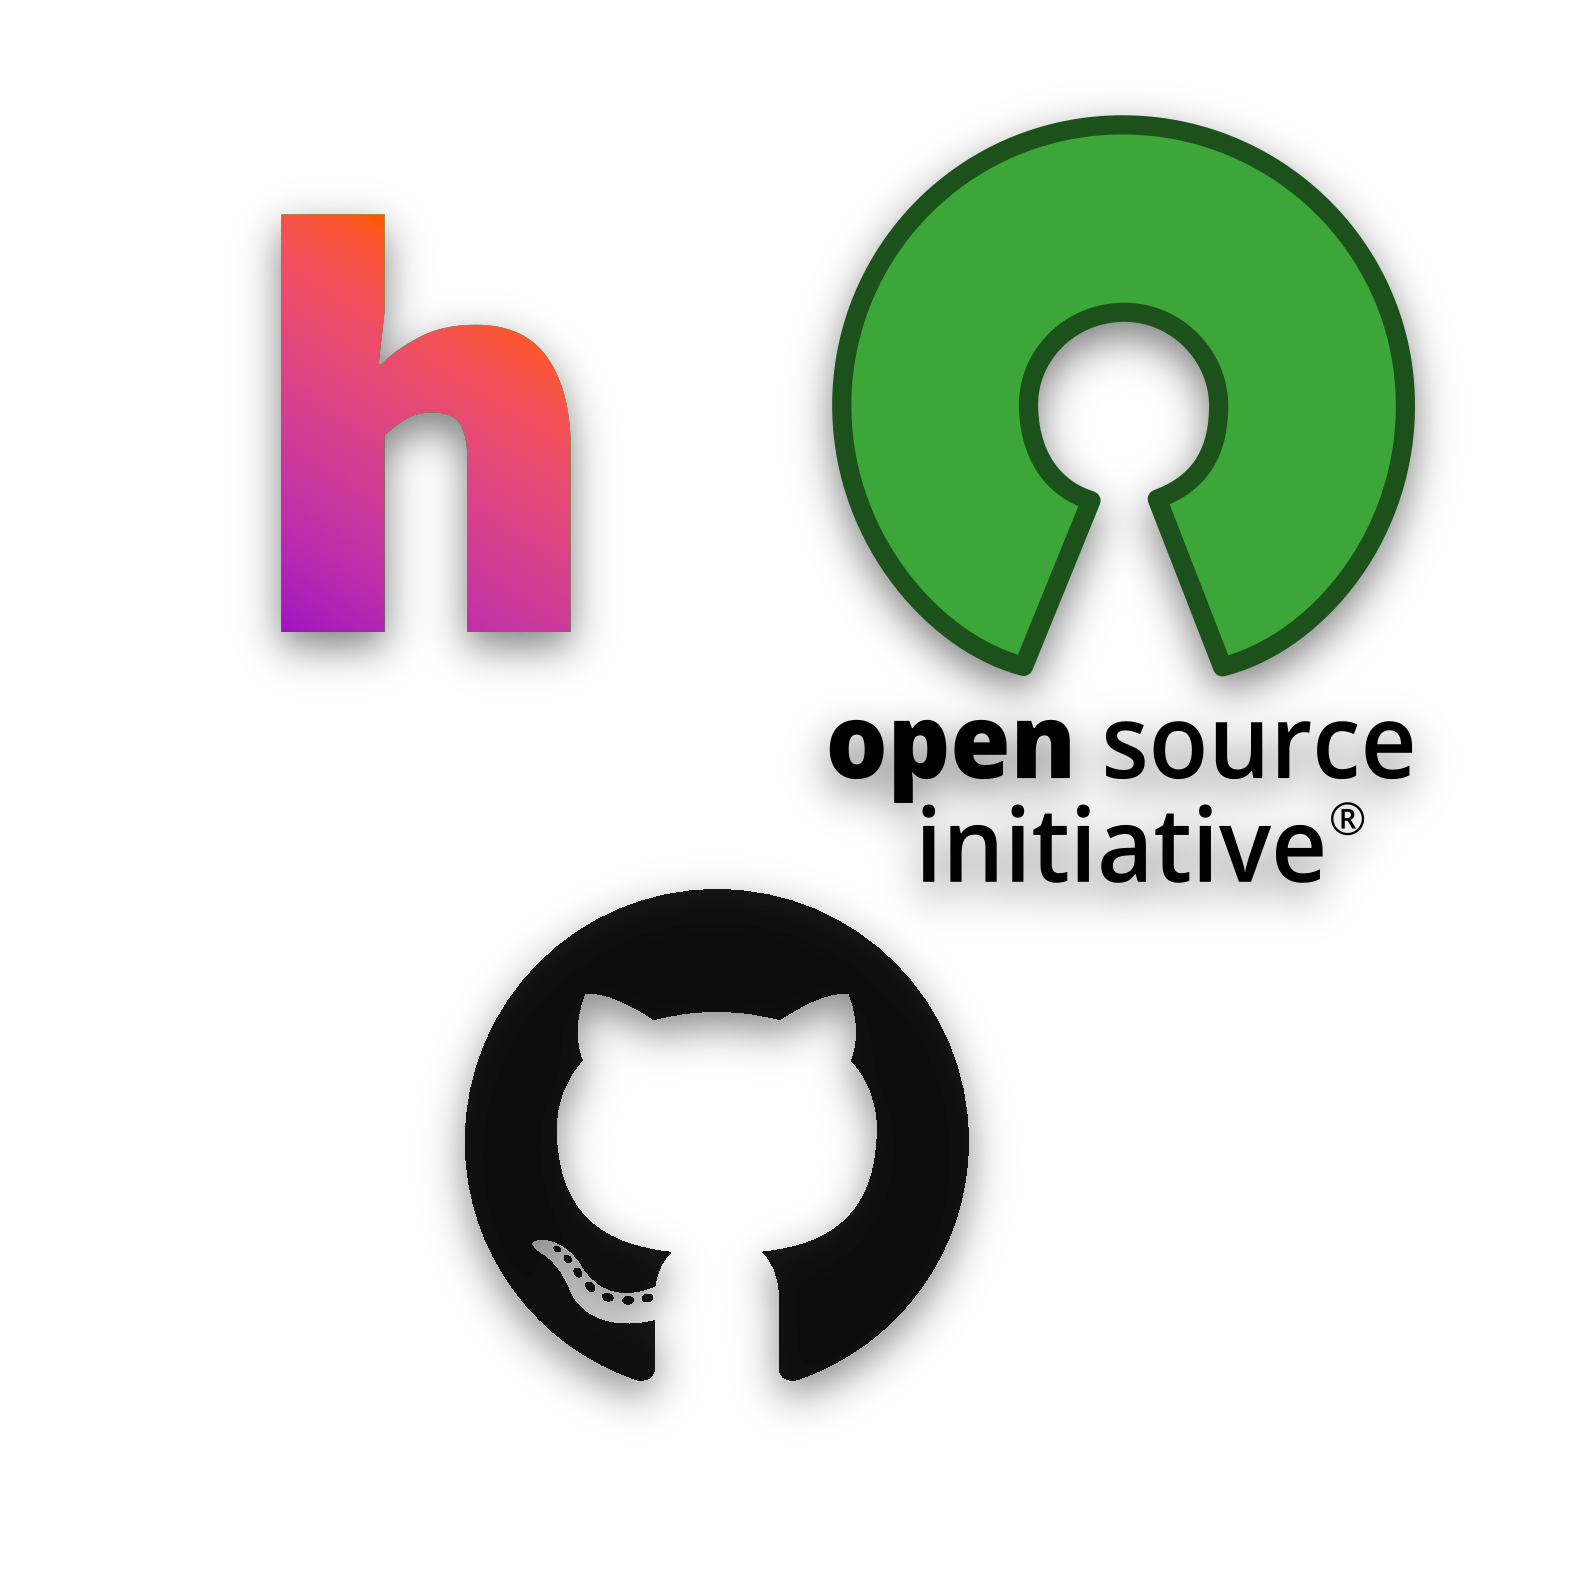 hdoc logo with Open Source Initiative and GitHub logos.